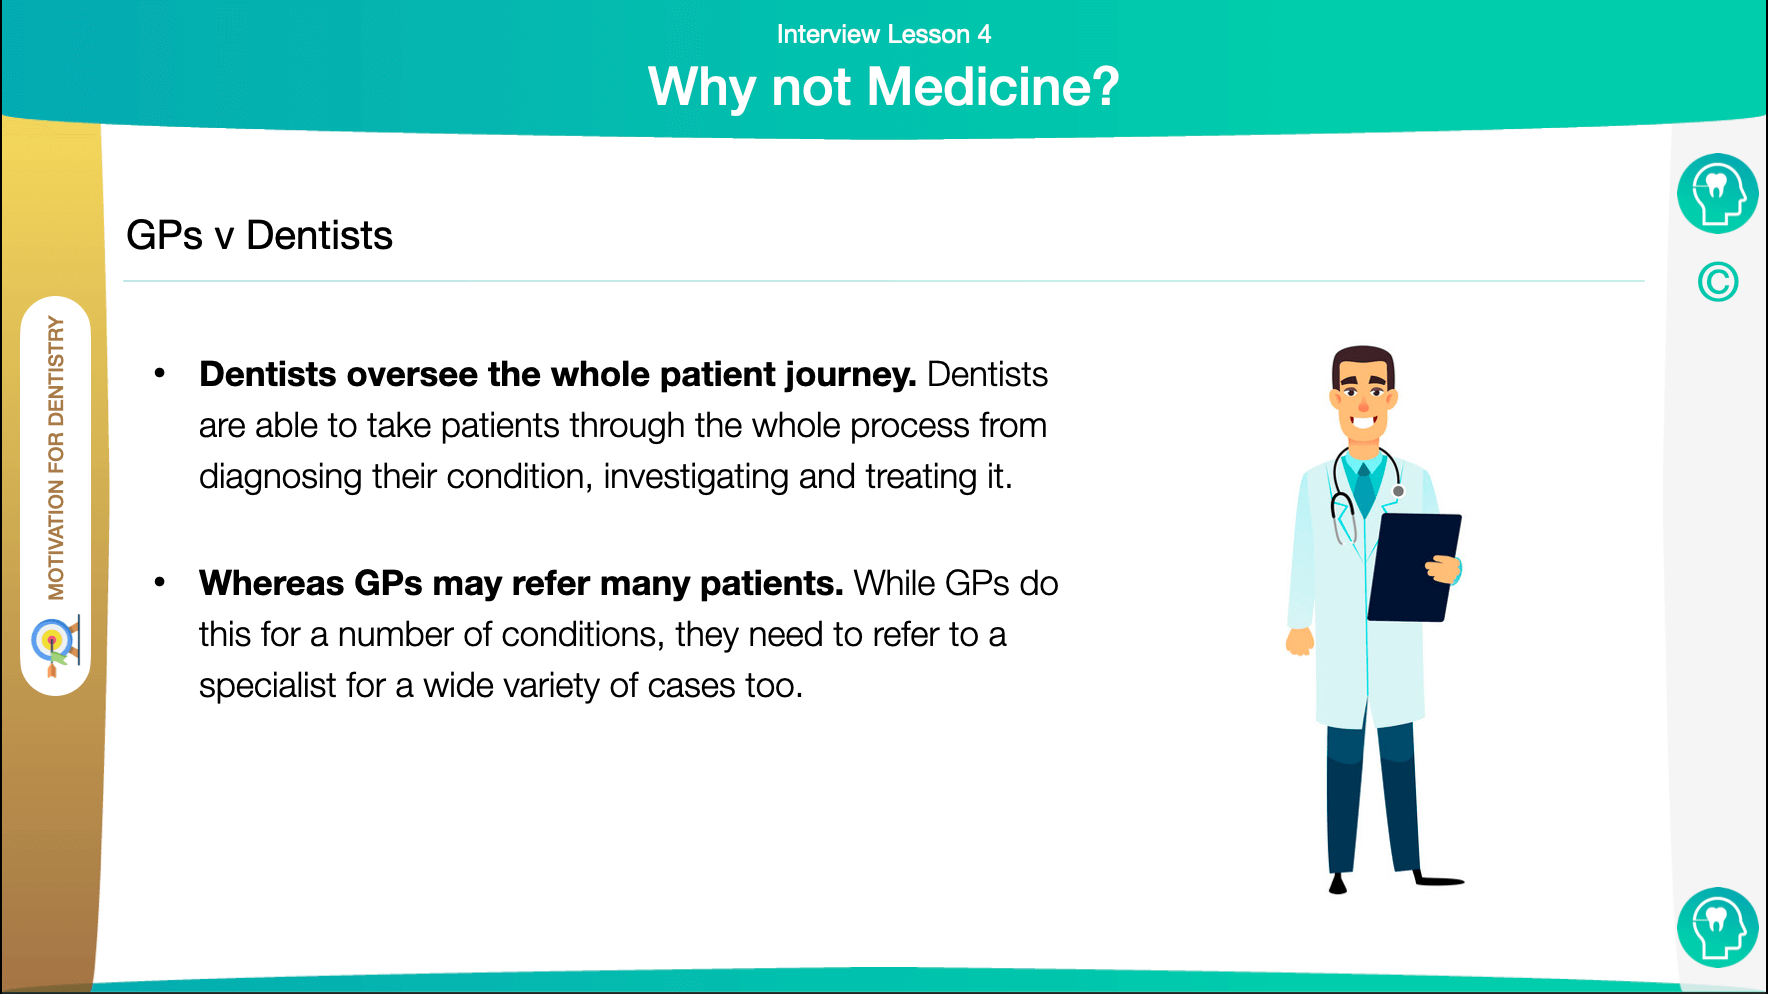 Why not Medicine?